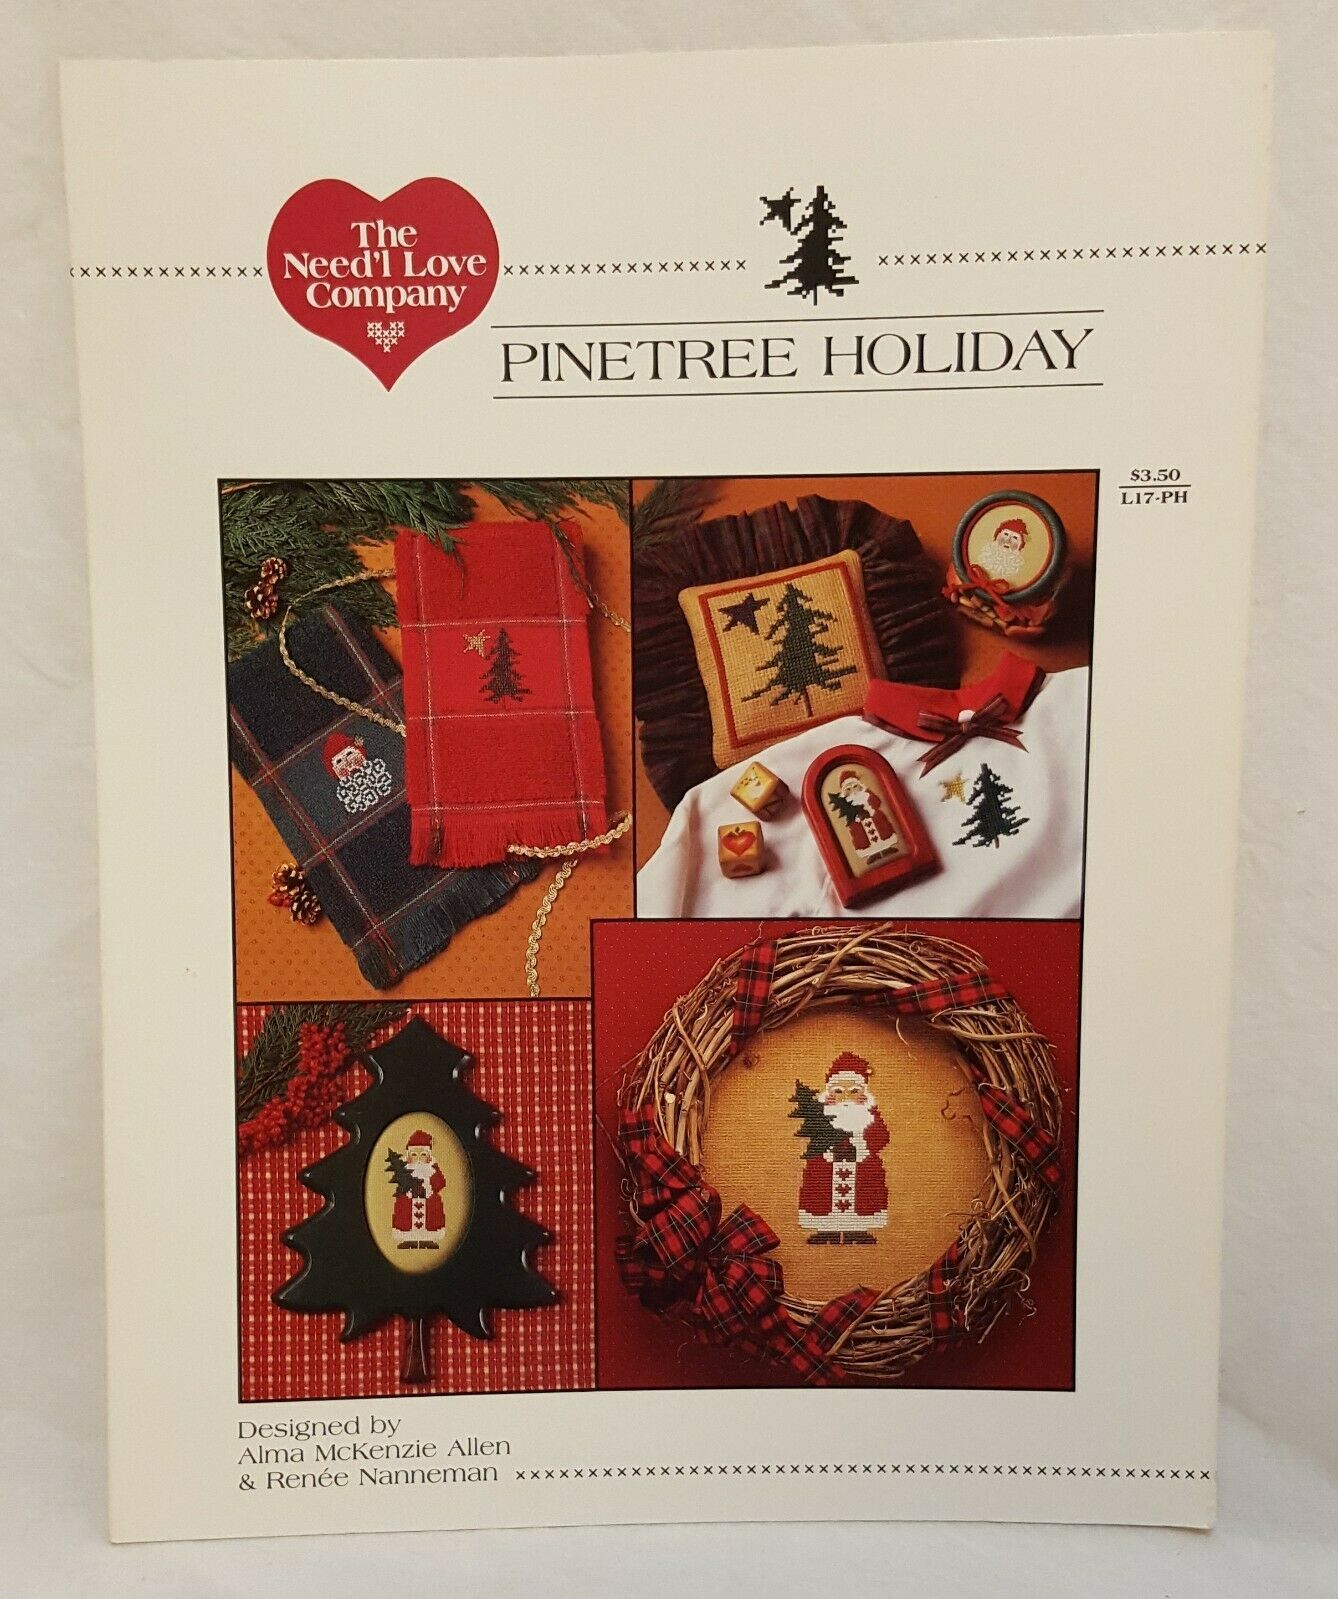 Christmas Pinetree Holiday Counted Cross Stitch Pattern Leaflet Book Need'l Love - $12.99